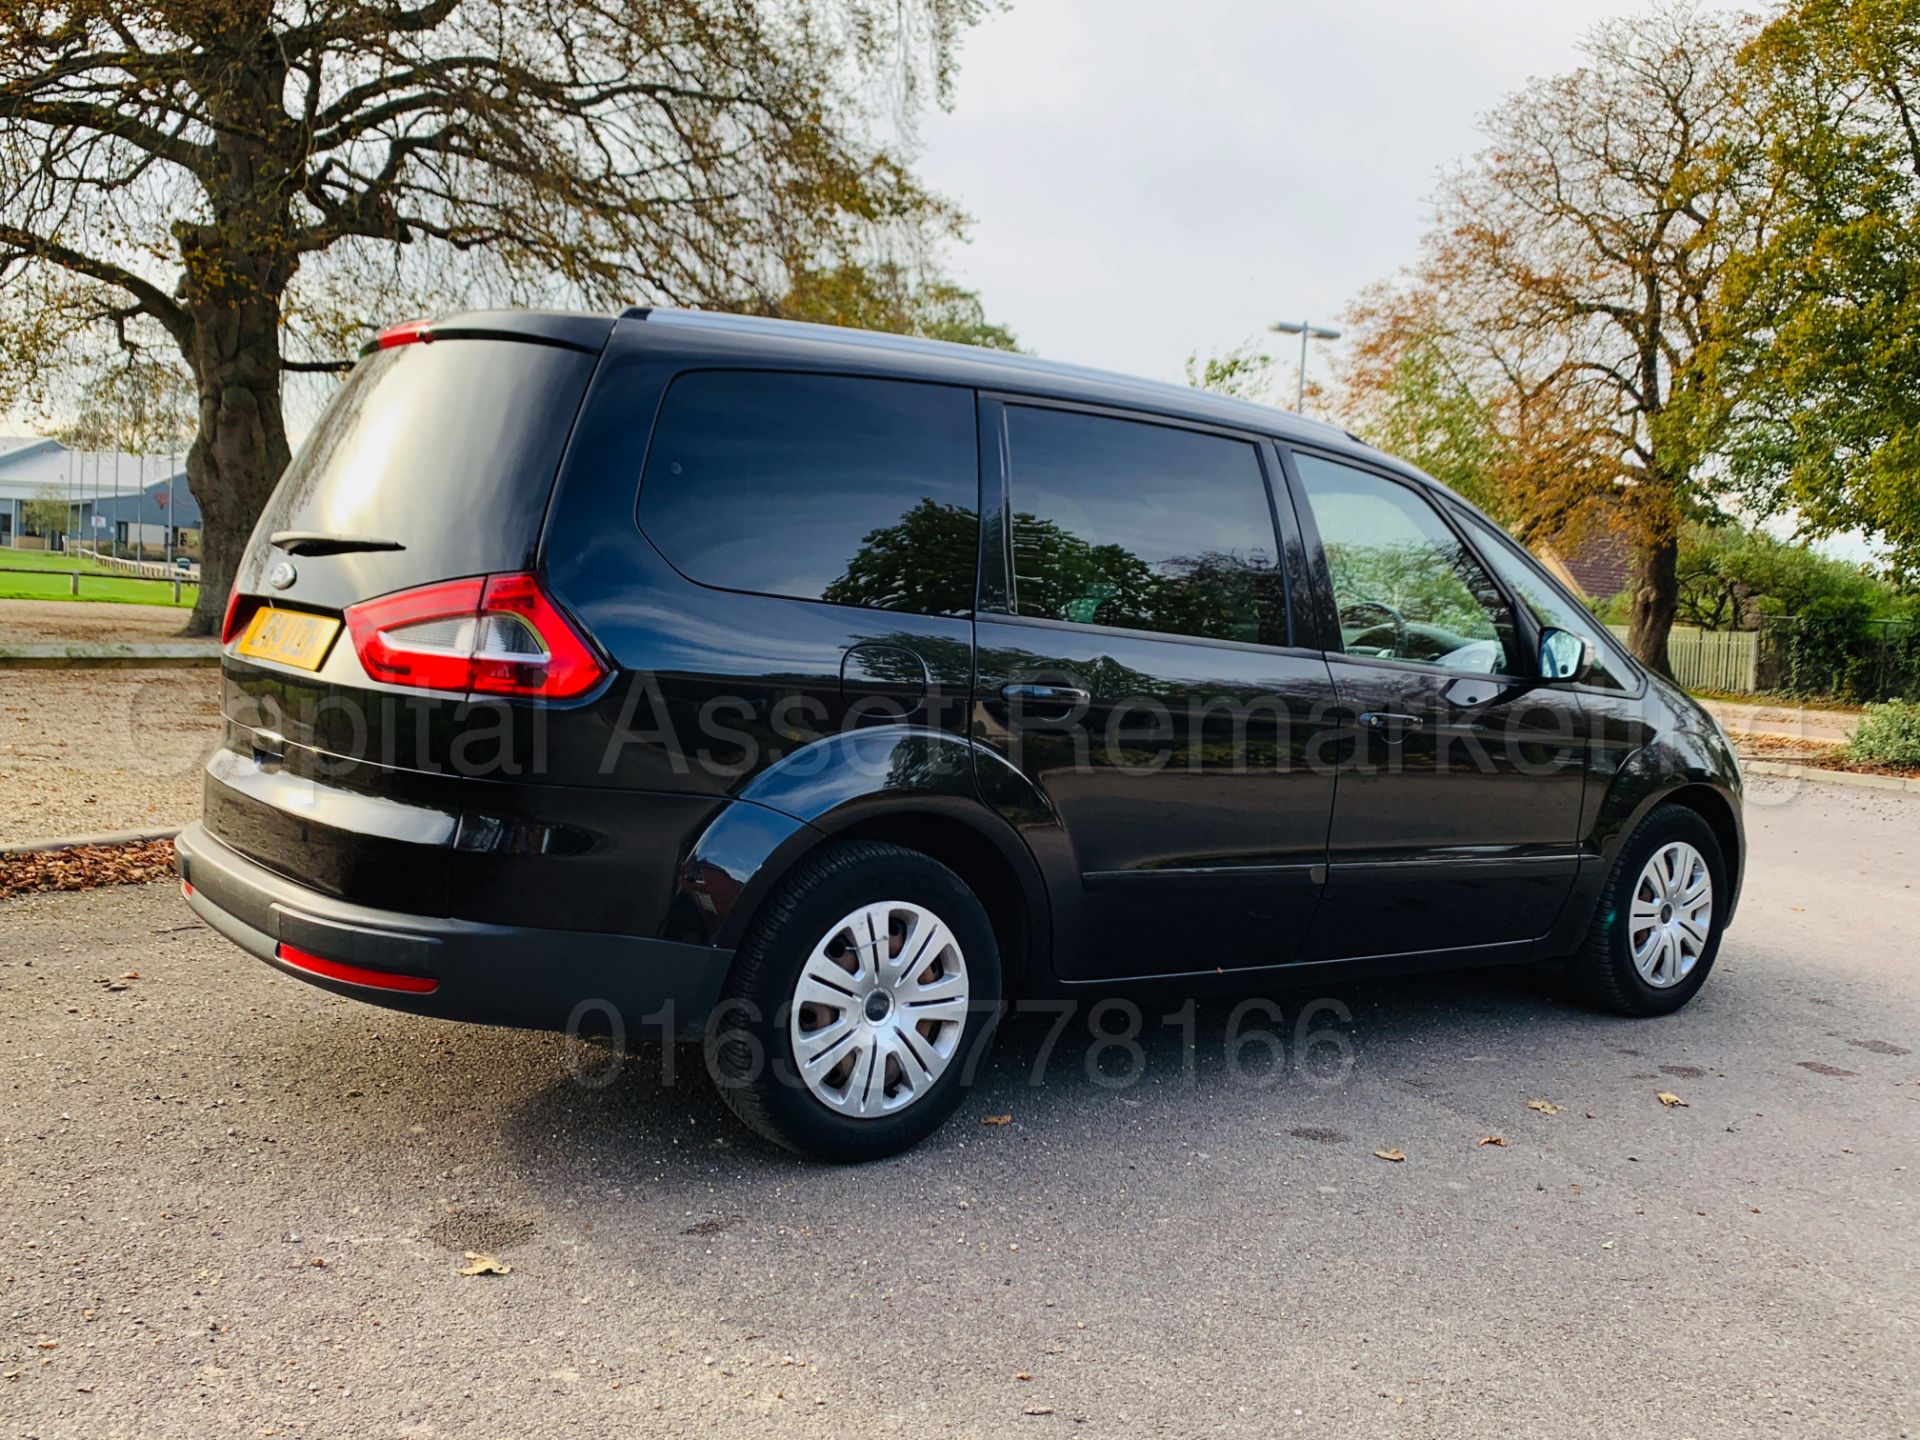 (ON SALE) FORD GALAXY **ZETEC** 7 SEATER MPV (2014) 2.0 TDCI - 140 BHP - AUTO POWER SHIFT (1 OWNER) - Image 11 of 37